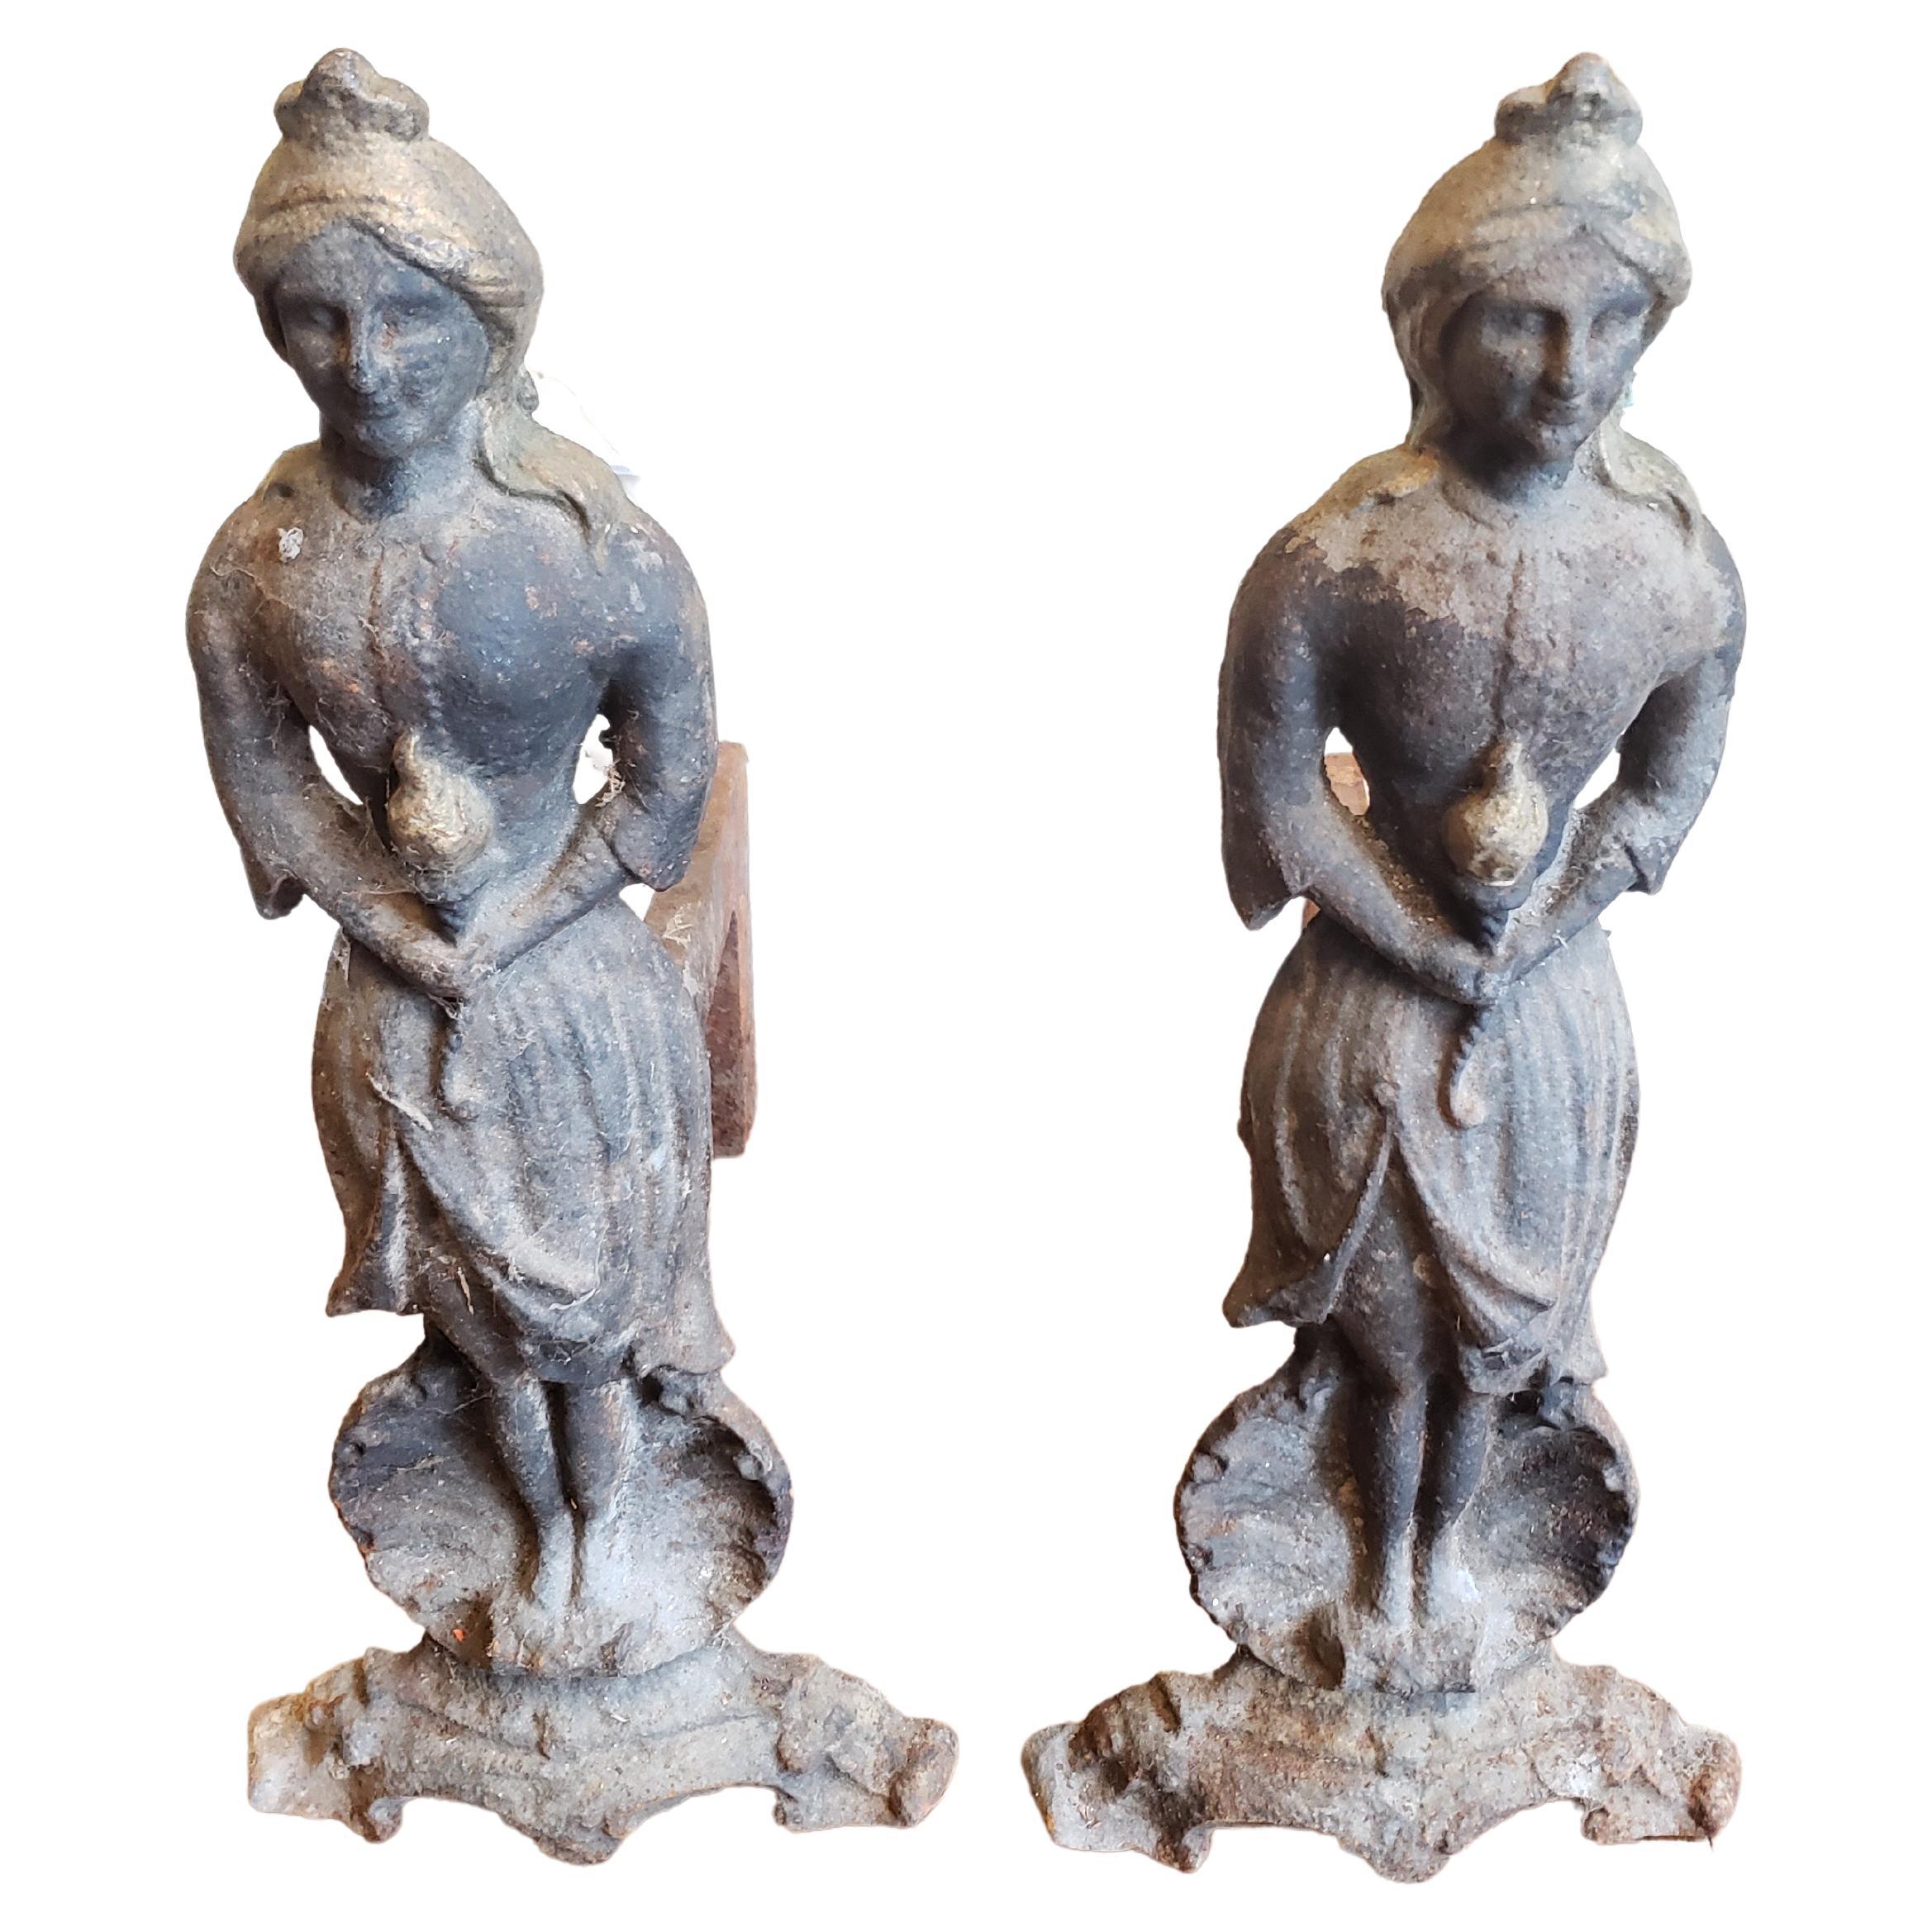 Antique Figural Cast and Wrought Iron Fireplace Andersons, Circa 1860s, a Pair For Sale 1